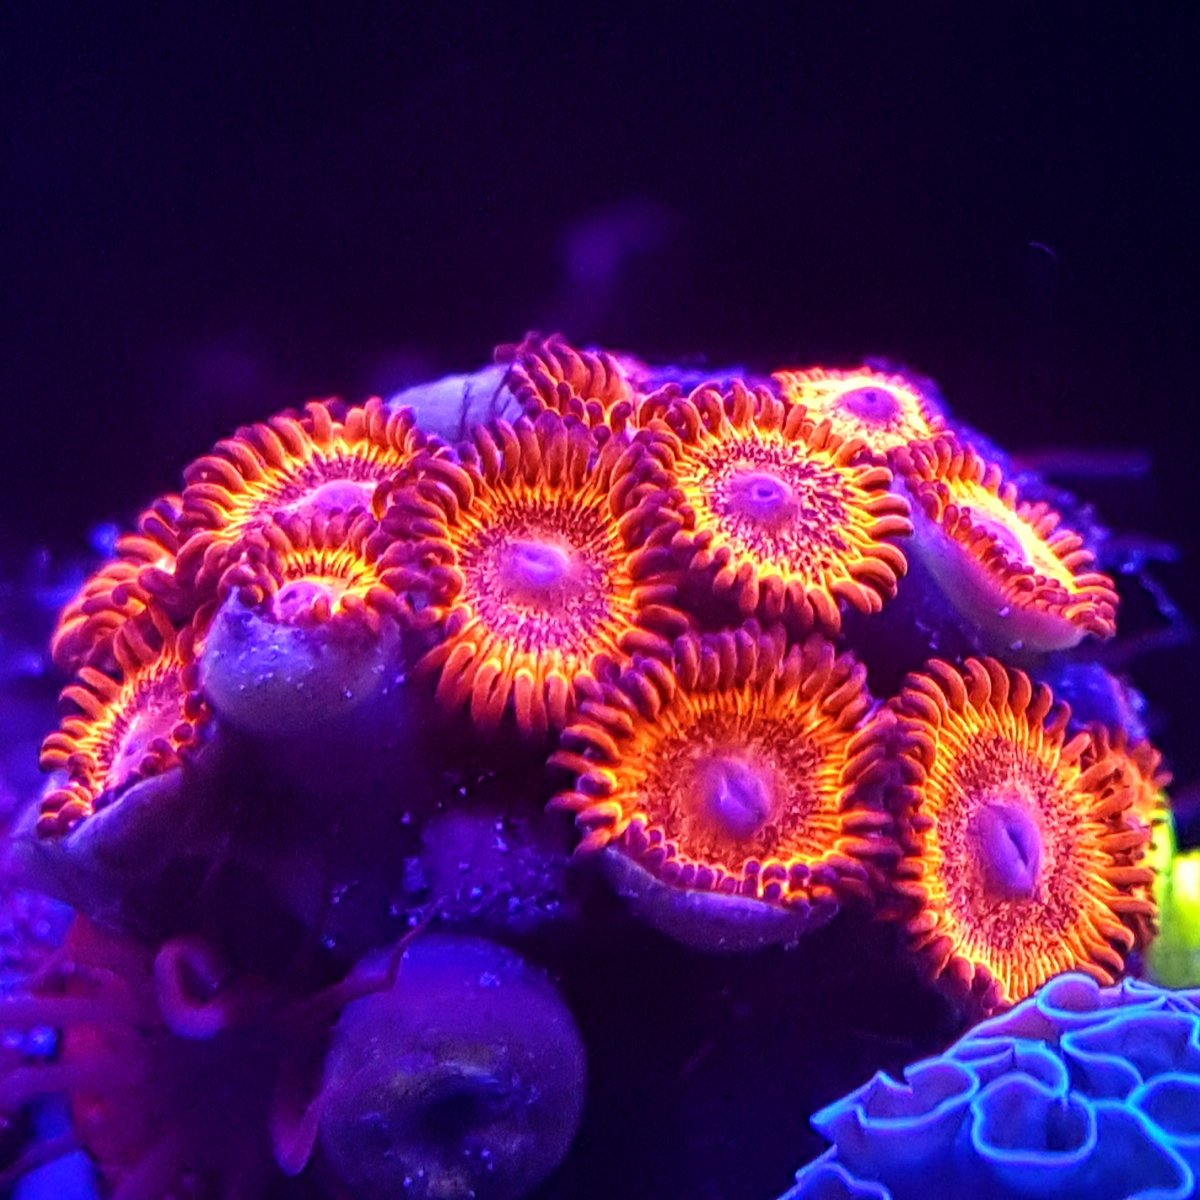 Palythoa and Zoanthid IDs | REEF2REEF Saltwater and Reef Aquarium Forum